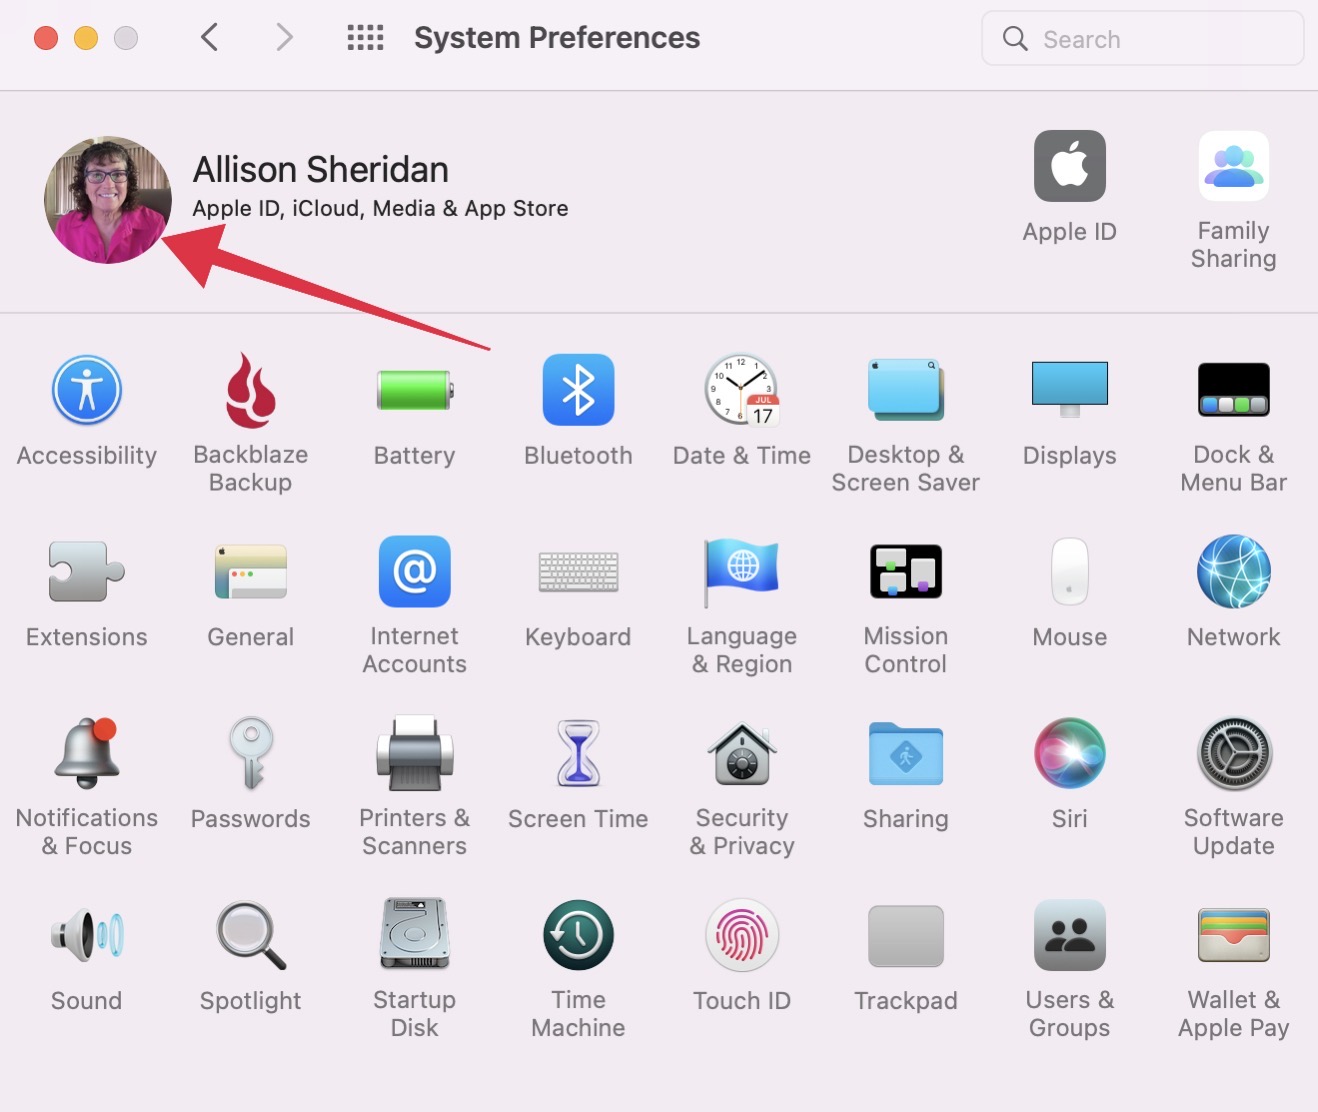 Select Your Avatar in System Preferences